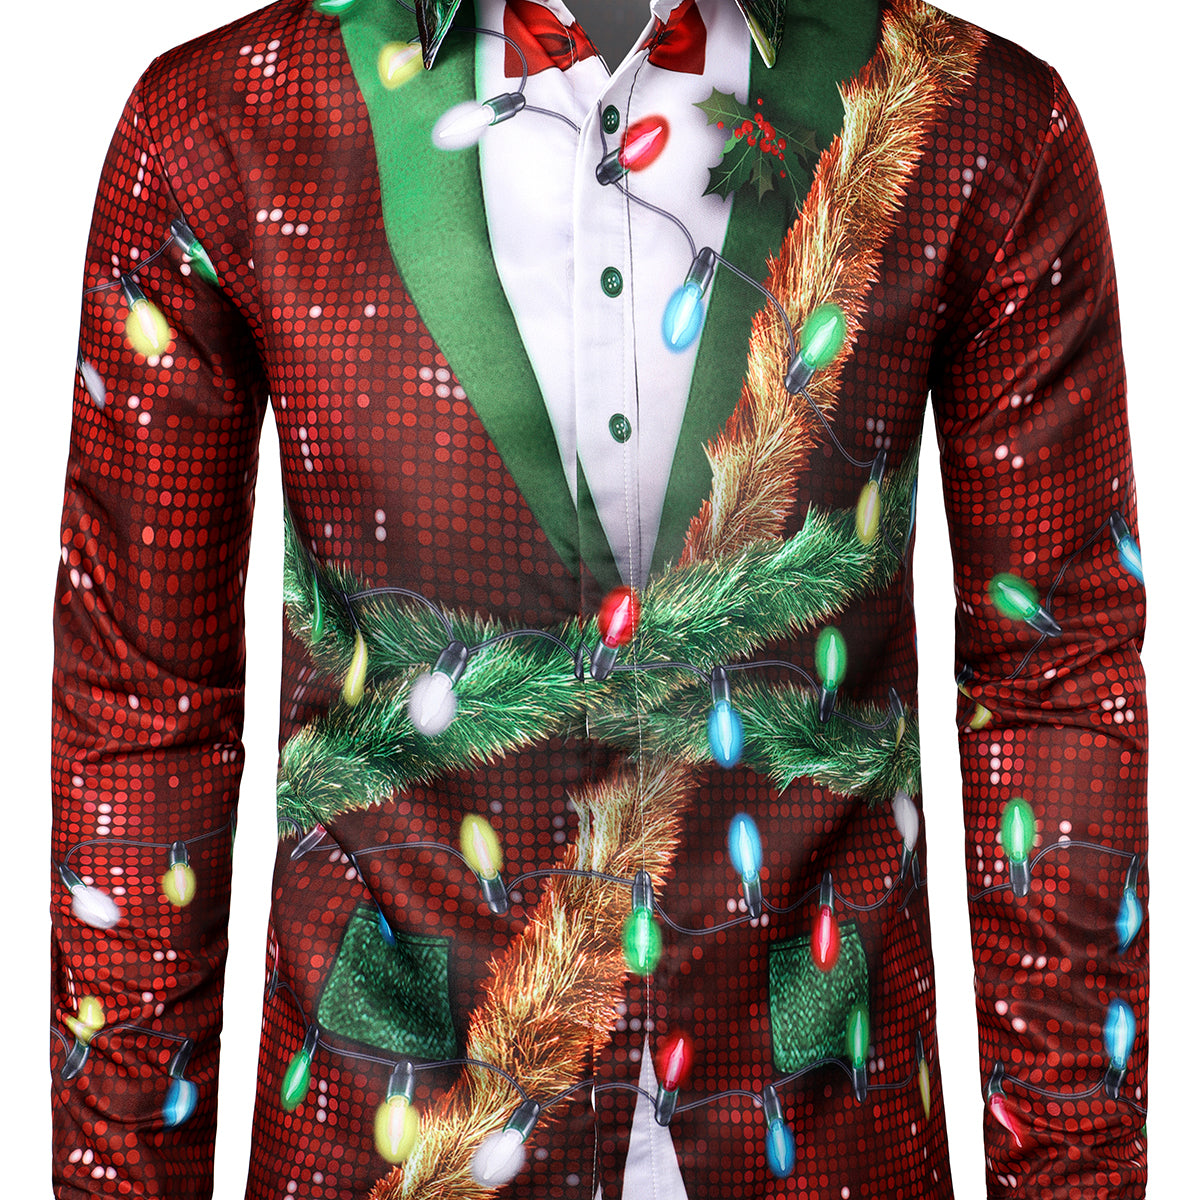 Men's Christmas Funny Outfit Themed Top Vacation Button Up Long Sleeve Dress Shirt